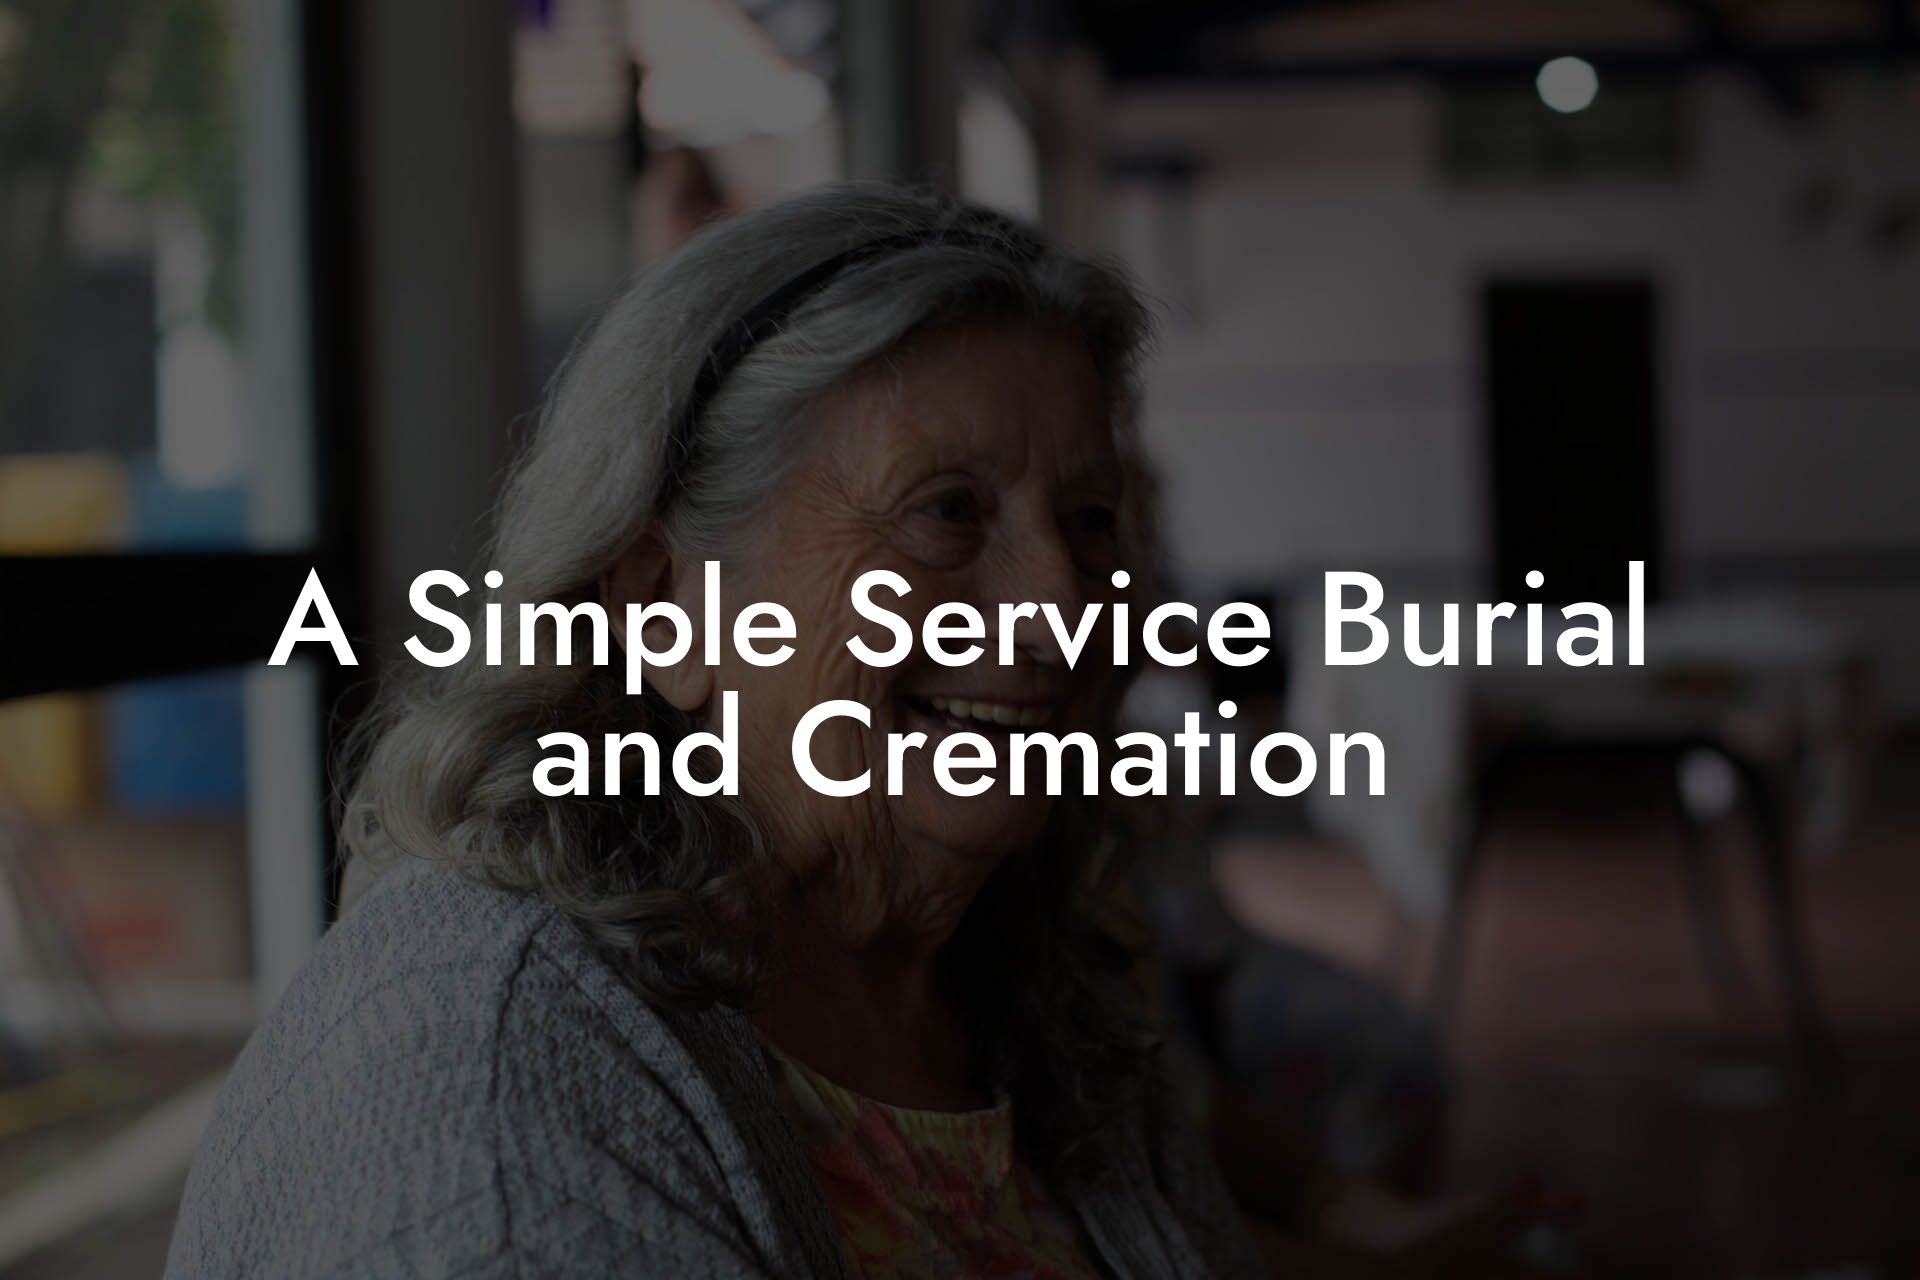 A Simple Service Burial and Cremation